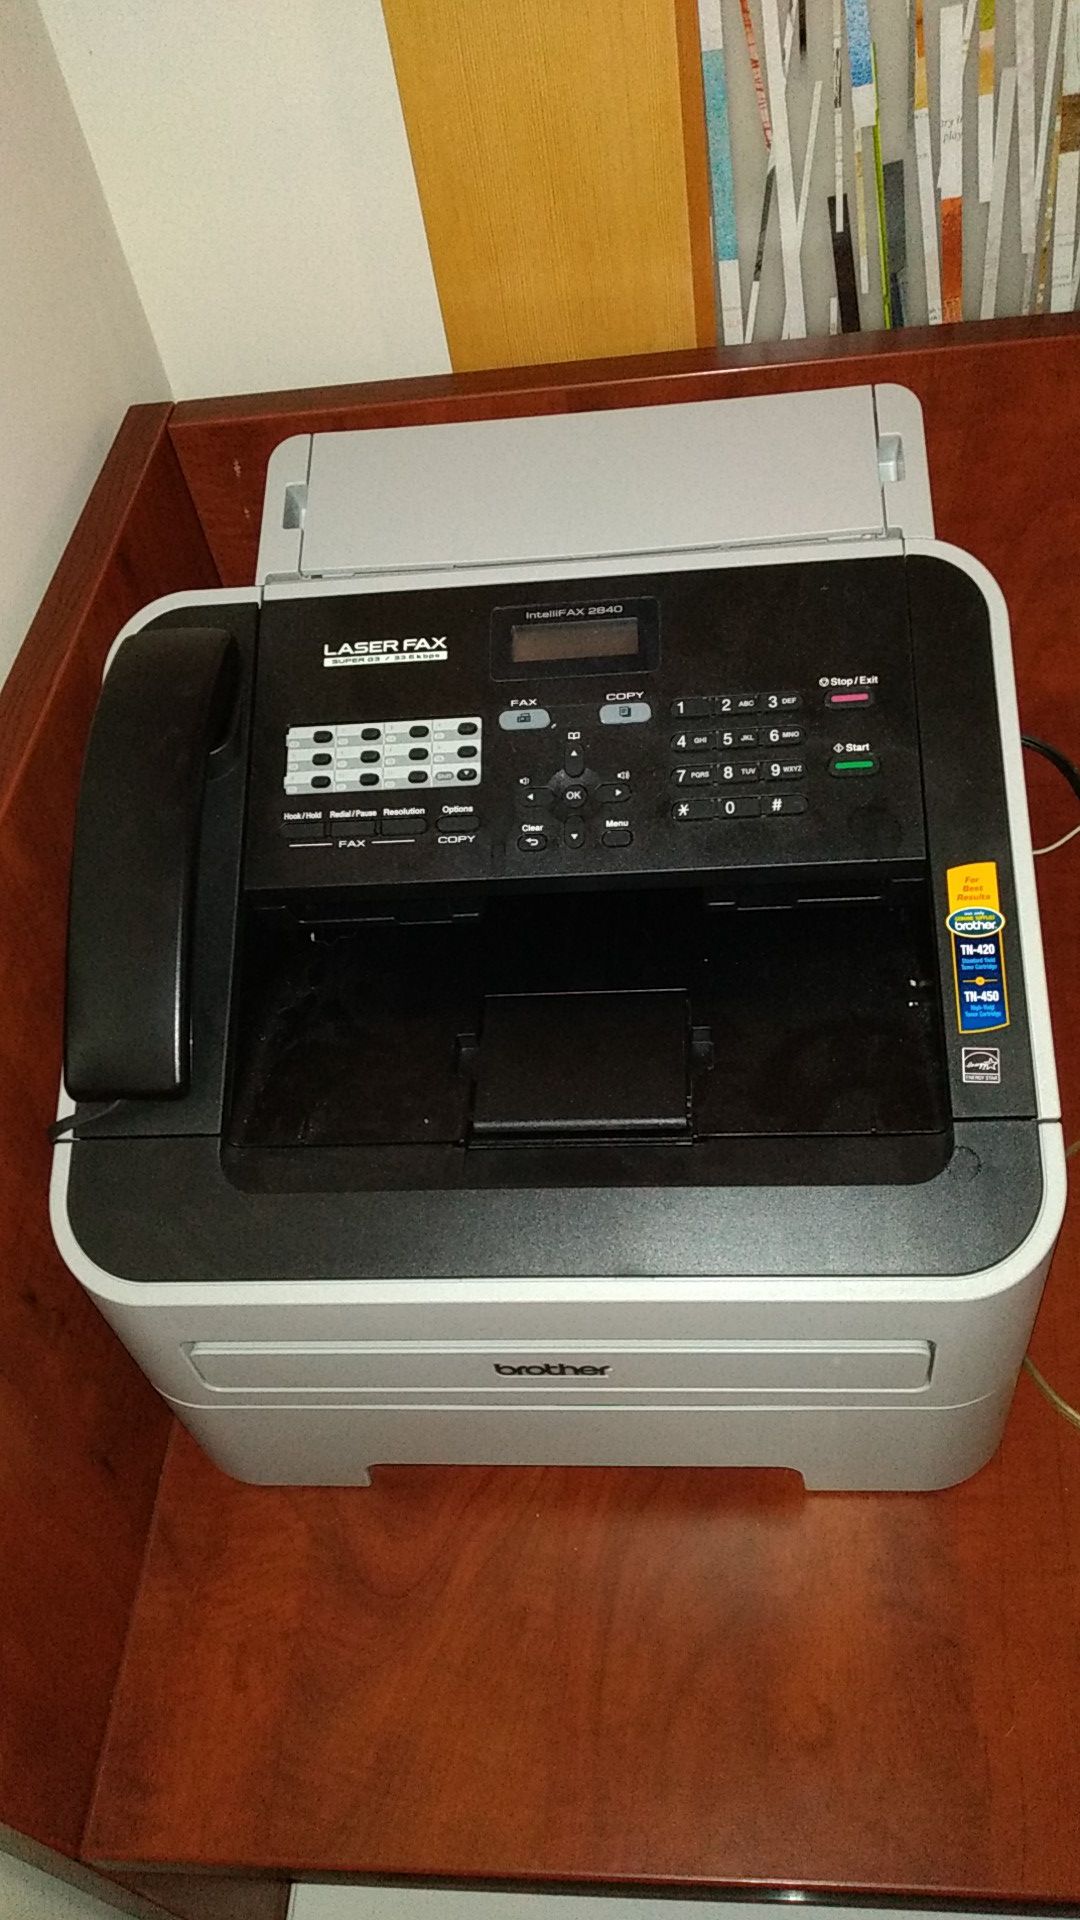 Brother IntelliFAX 2840 - barely used